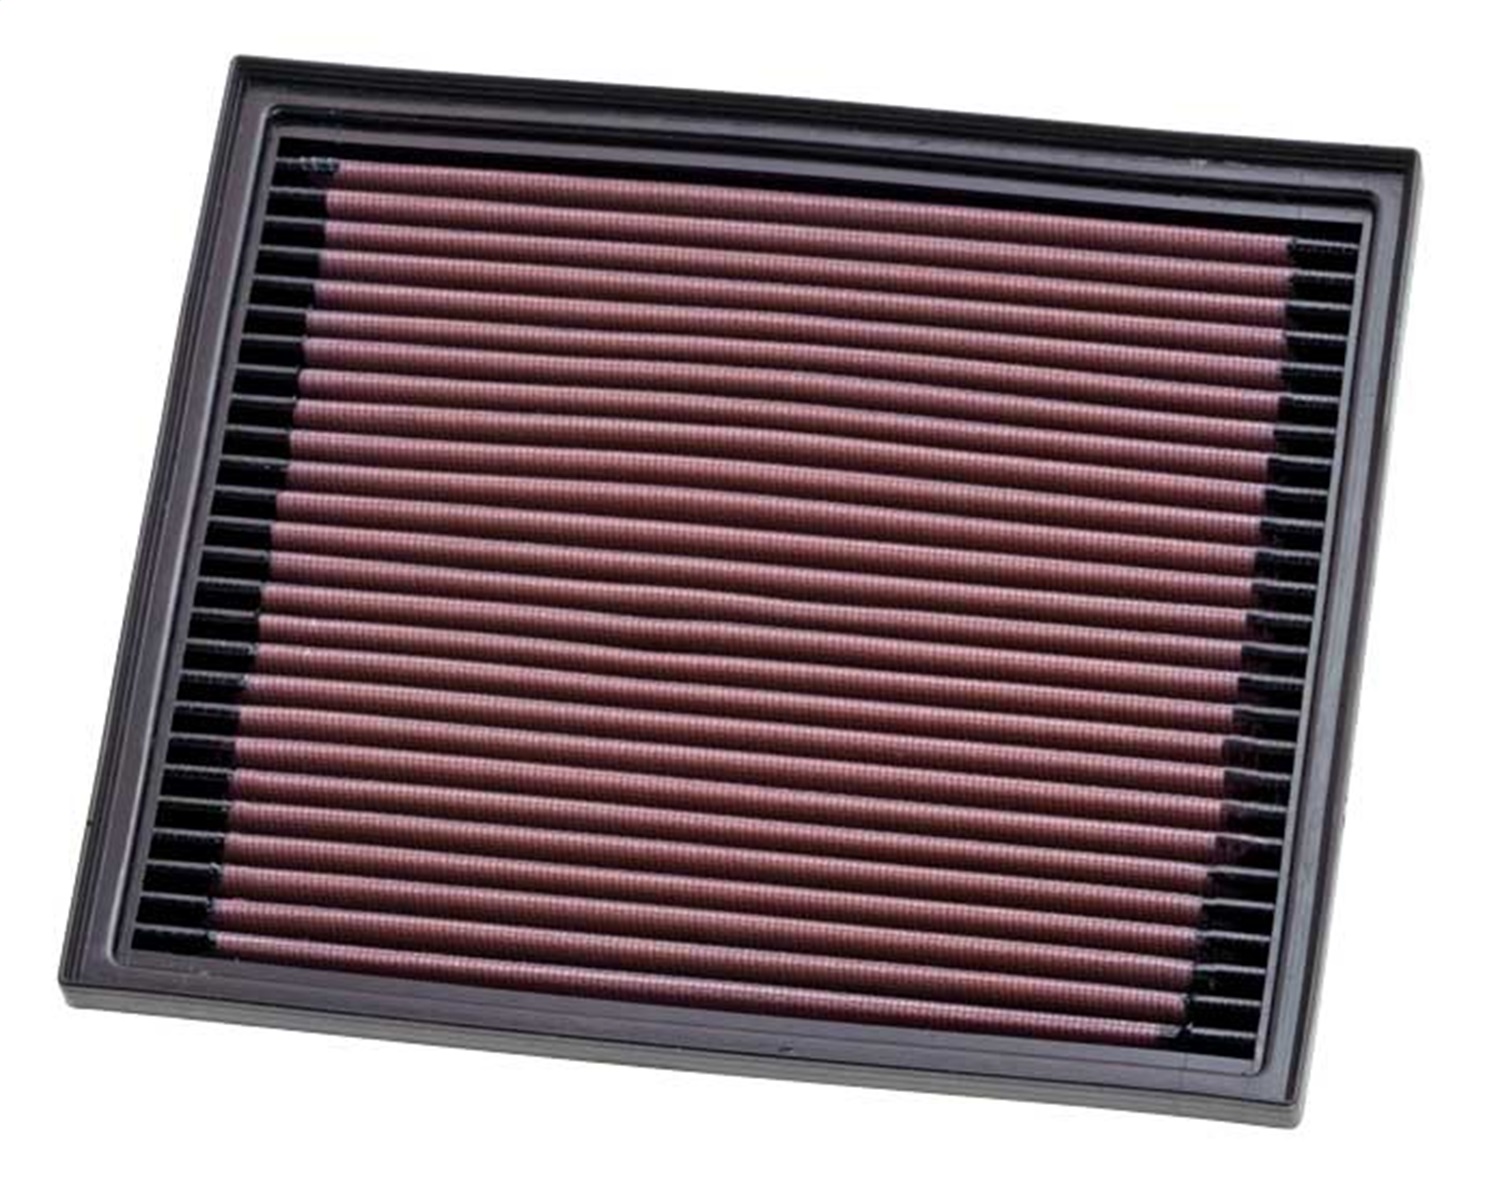 K&N Filters K&N Filters 33-2119 Air Filter Fits 97-04 Discovery Range Rover